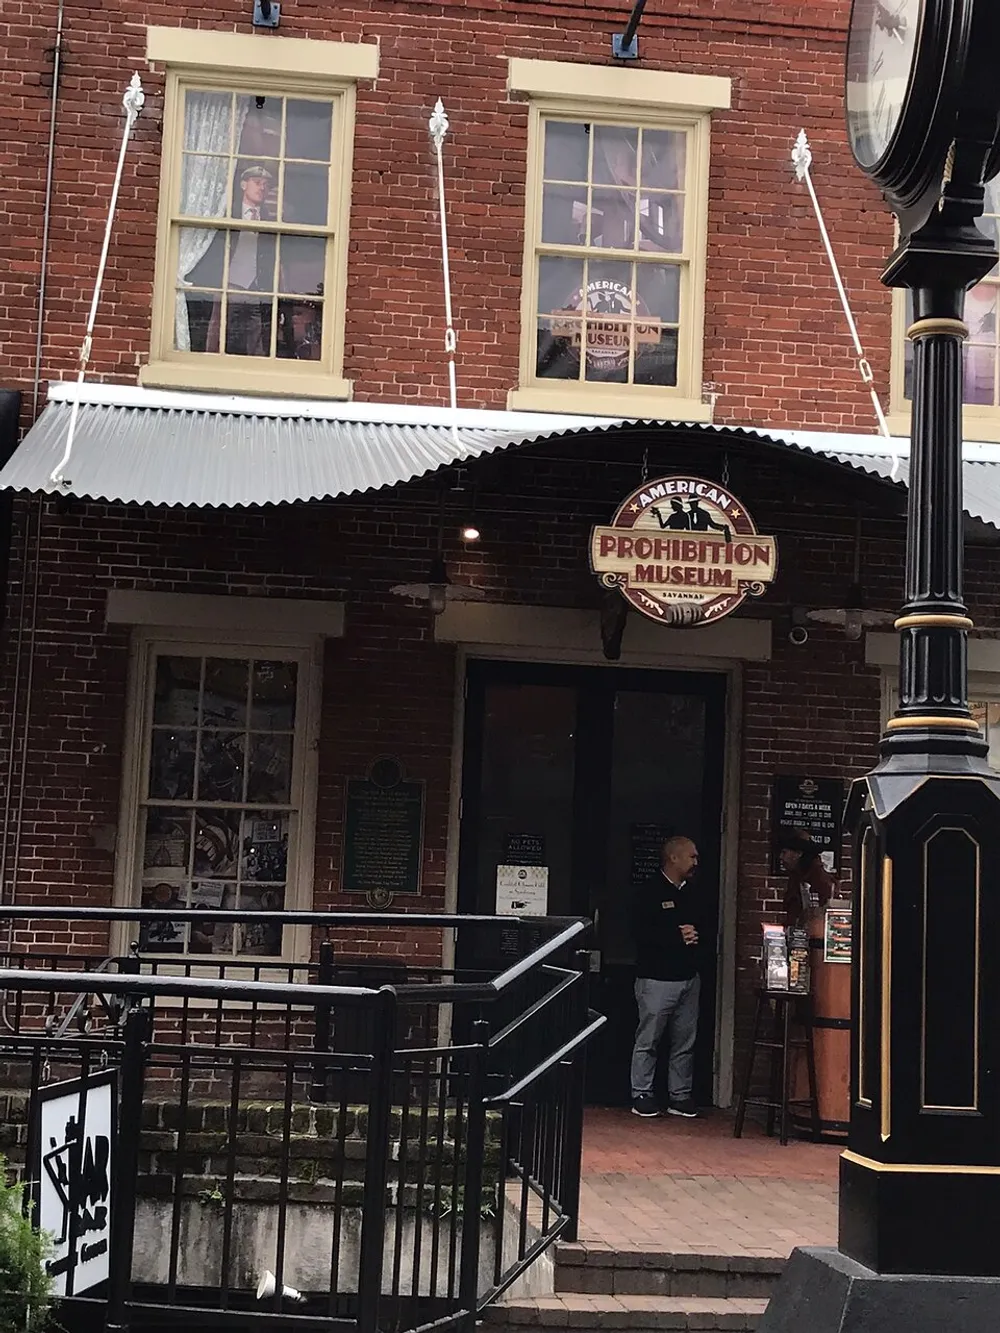 The image shows the exterior of the American Prohibition Museum with a person standing at the entrance under an awning featuring the museums sign set against a red brick building